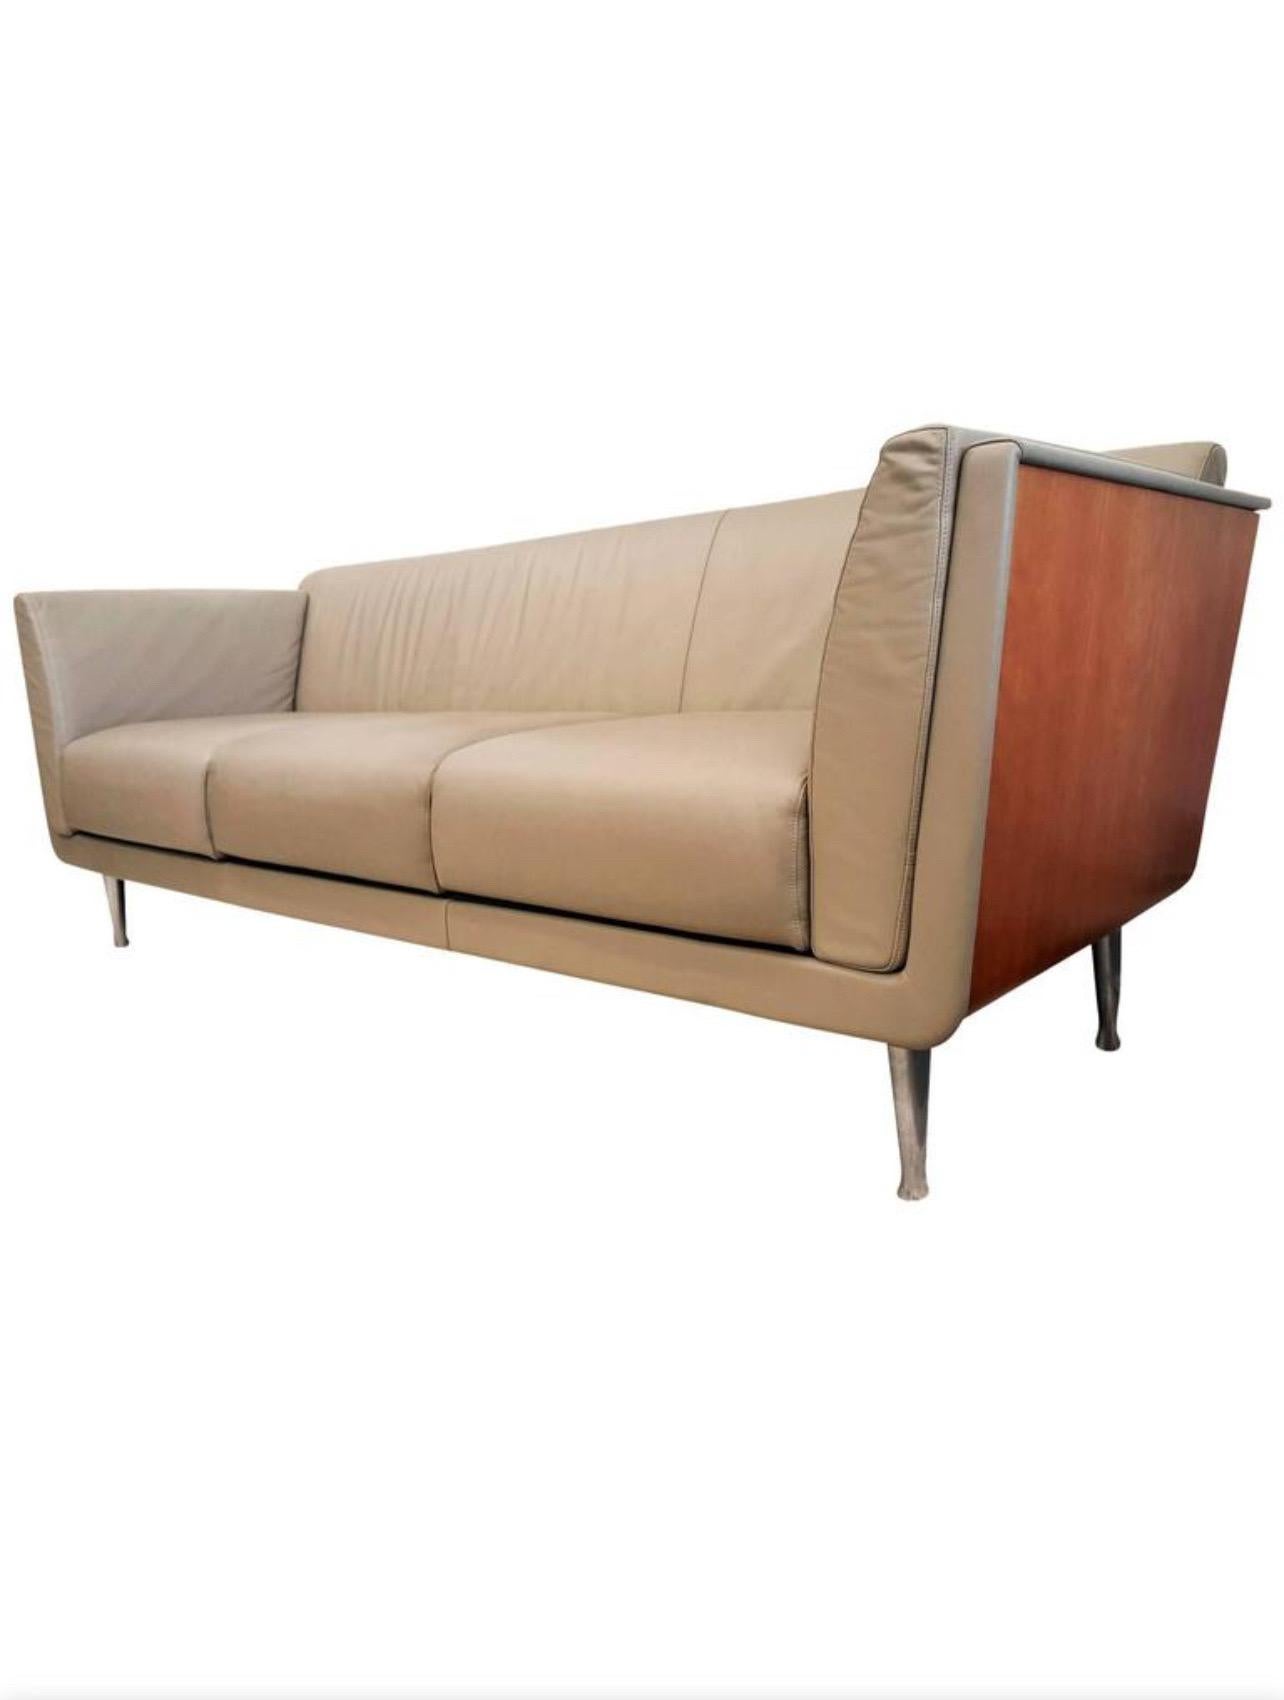 Goetz Sofa by Mark Goetz for Herman Miller in Cherry Wood  In Good Condition For Sale In San Diego, CA